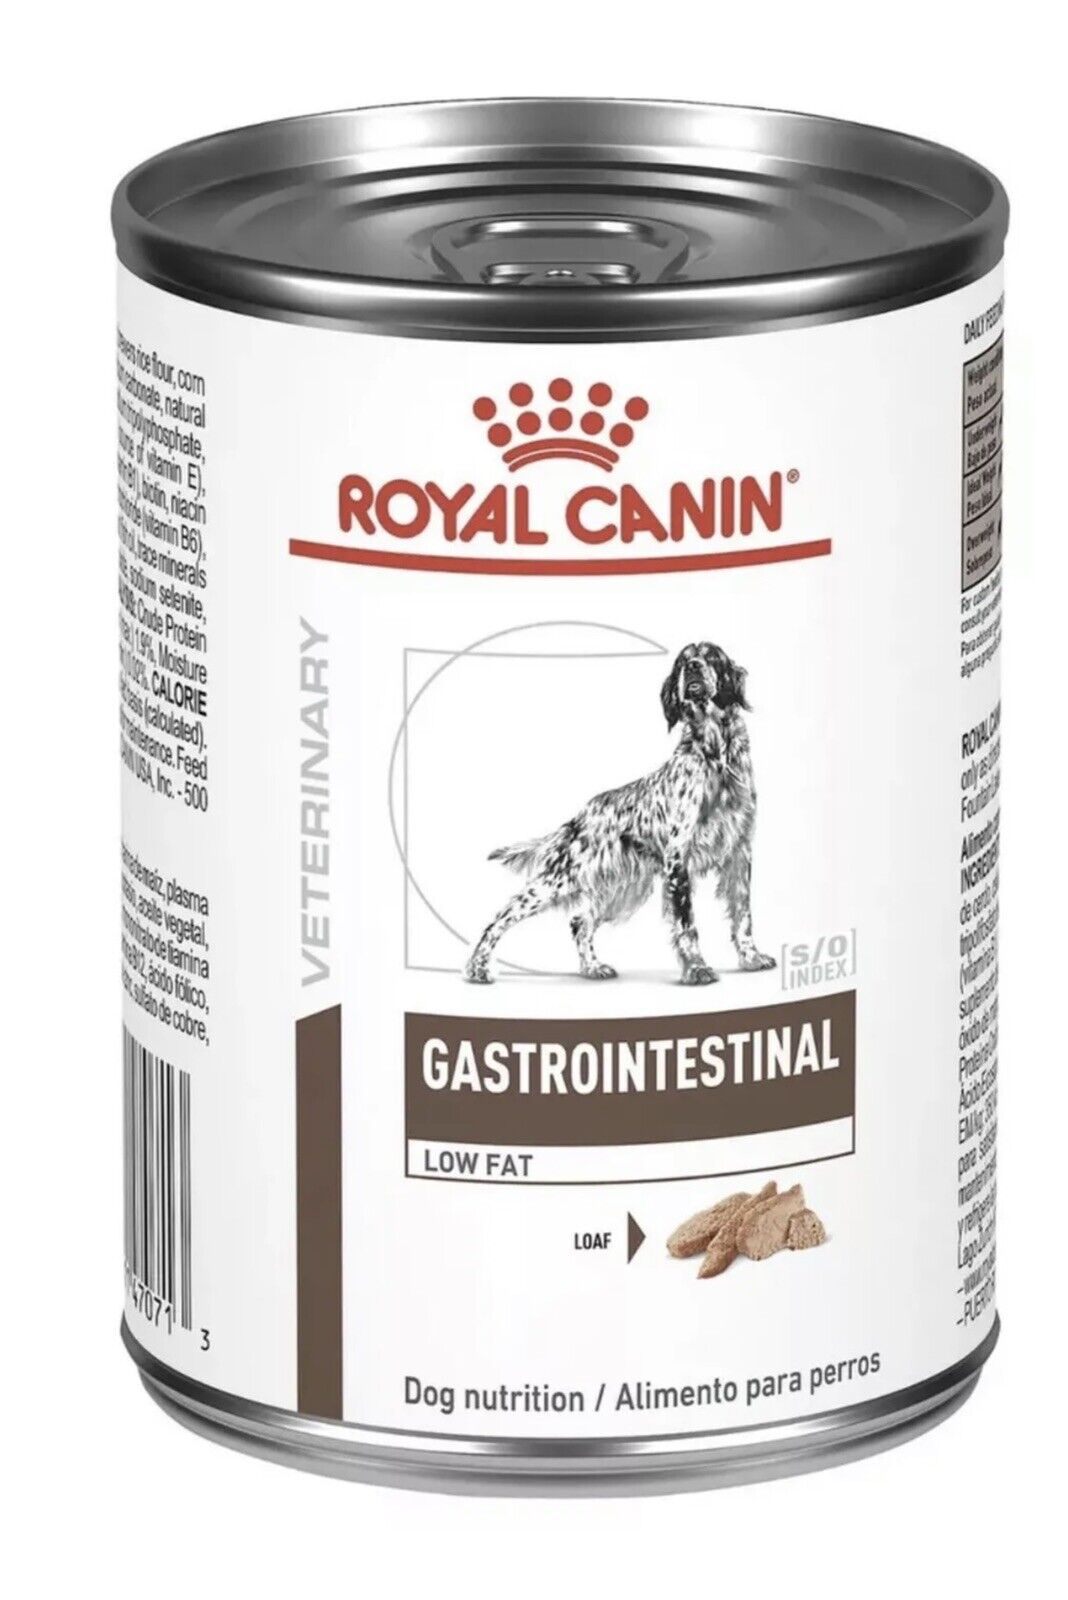 4xRoyal Canin Veterinary Diet Gastrointestinal Low Fat Canned Dog Food 13.6 oz